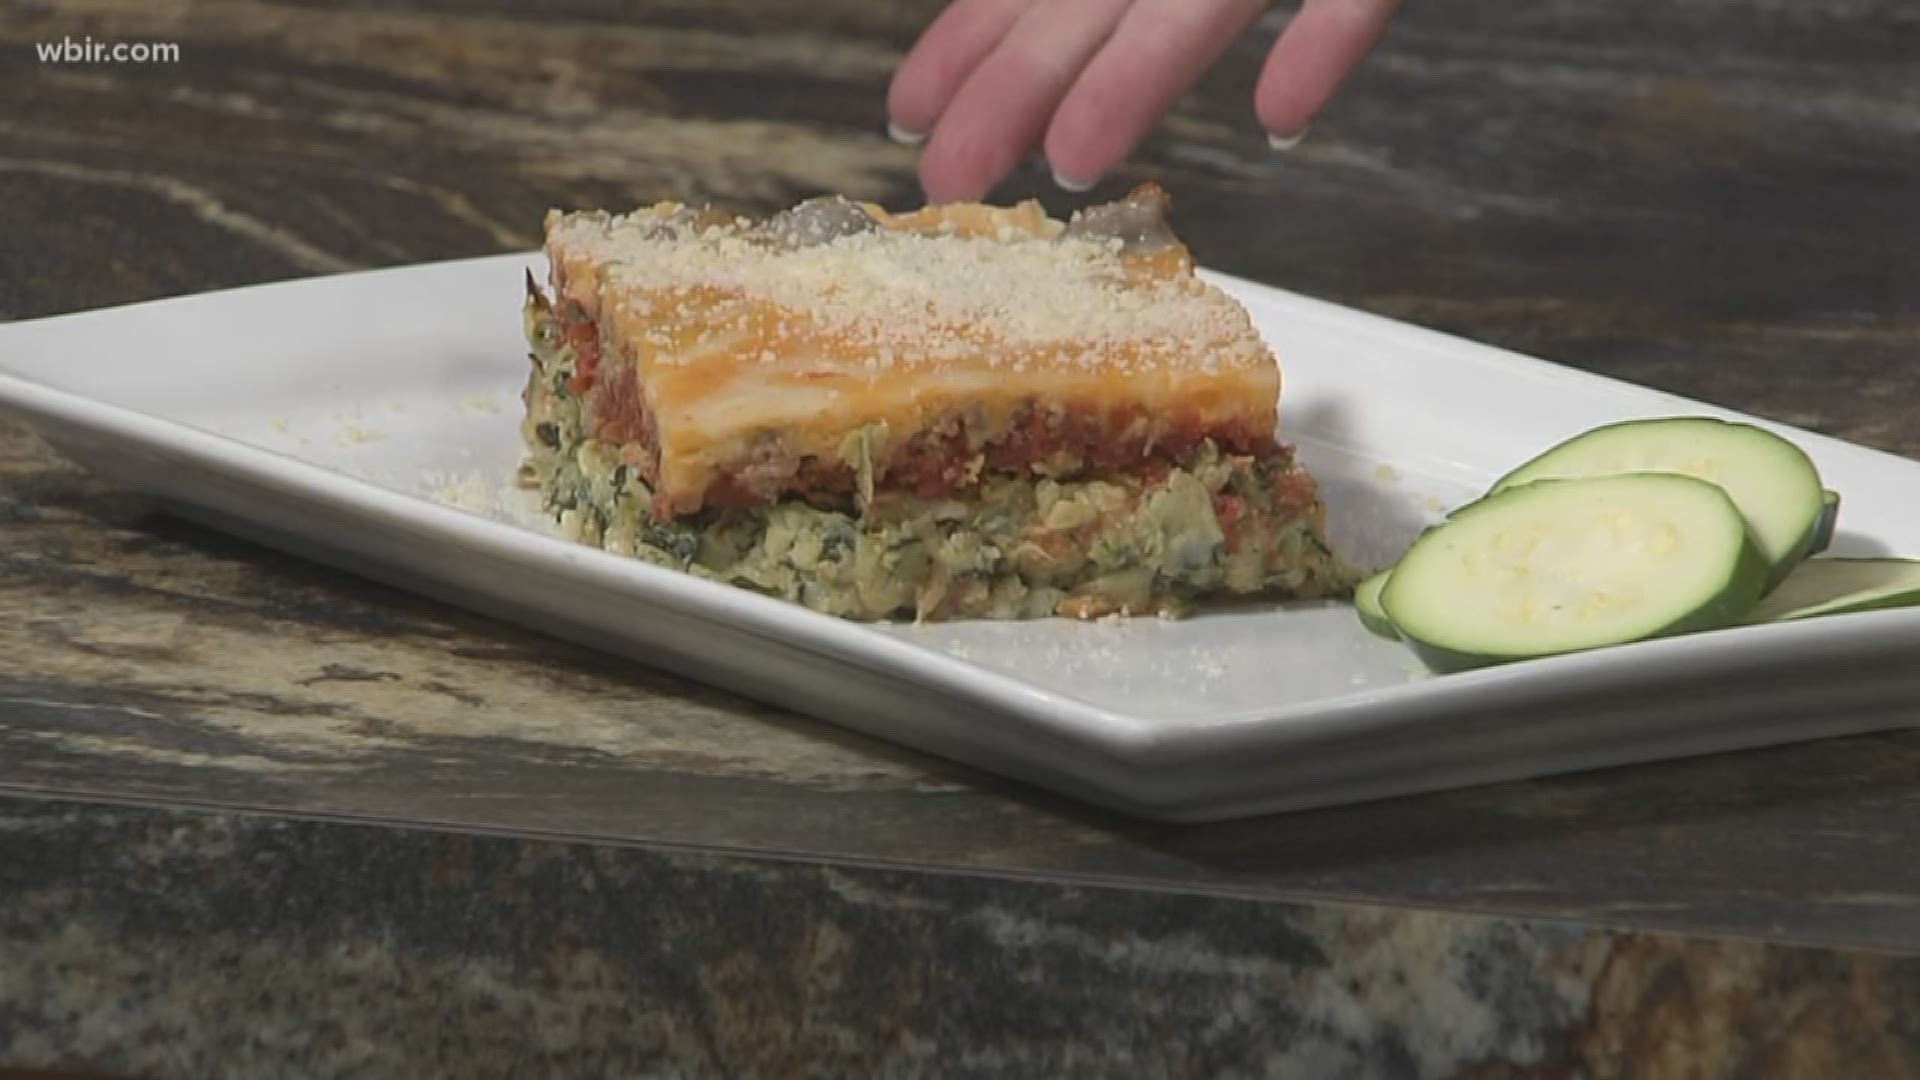 It's lunch time and Melissa Graves from Donna's Old Town Cafe is here with a savory option.